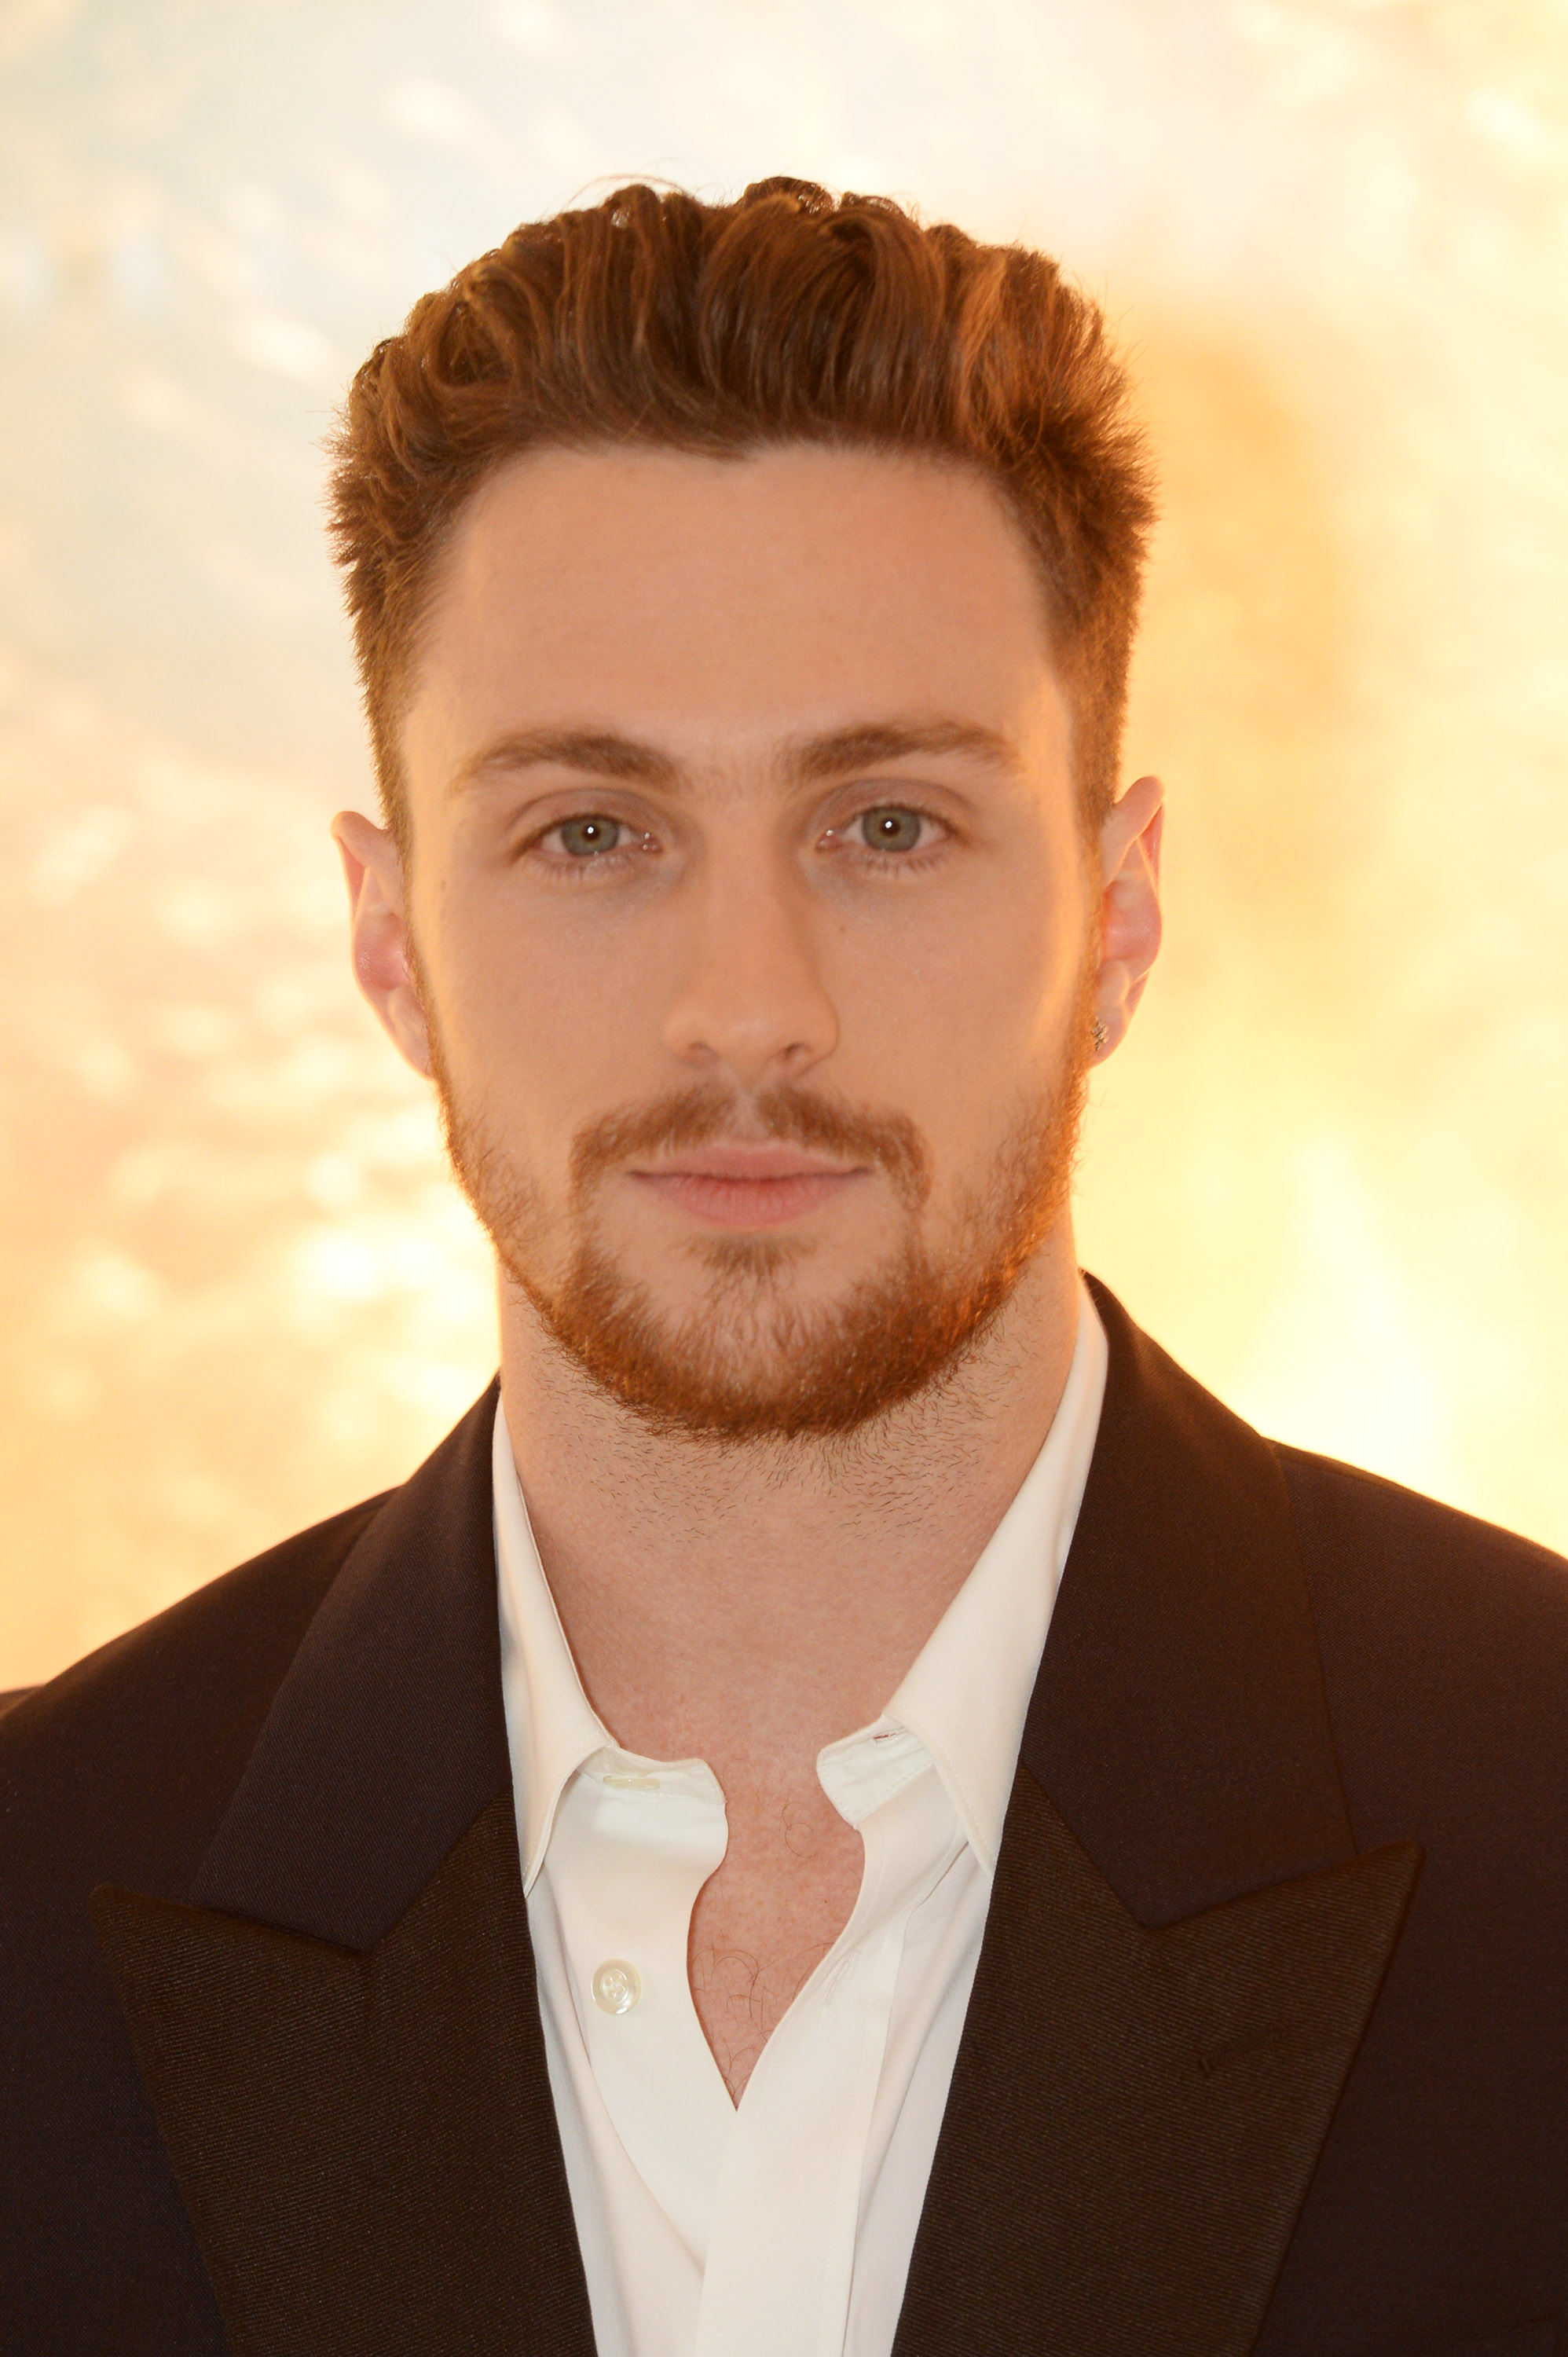 Aaron Taylor Johnson at the premiere of 'Godzilla' in 2014 | Source: Getty Images